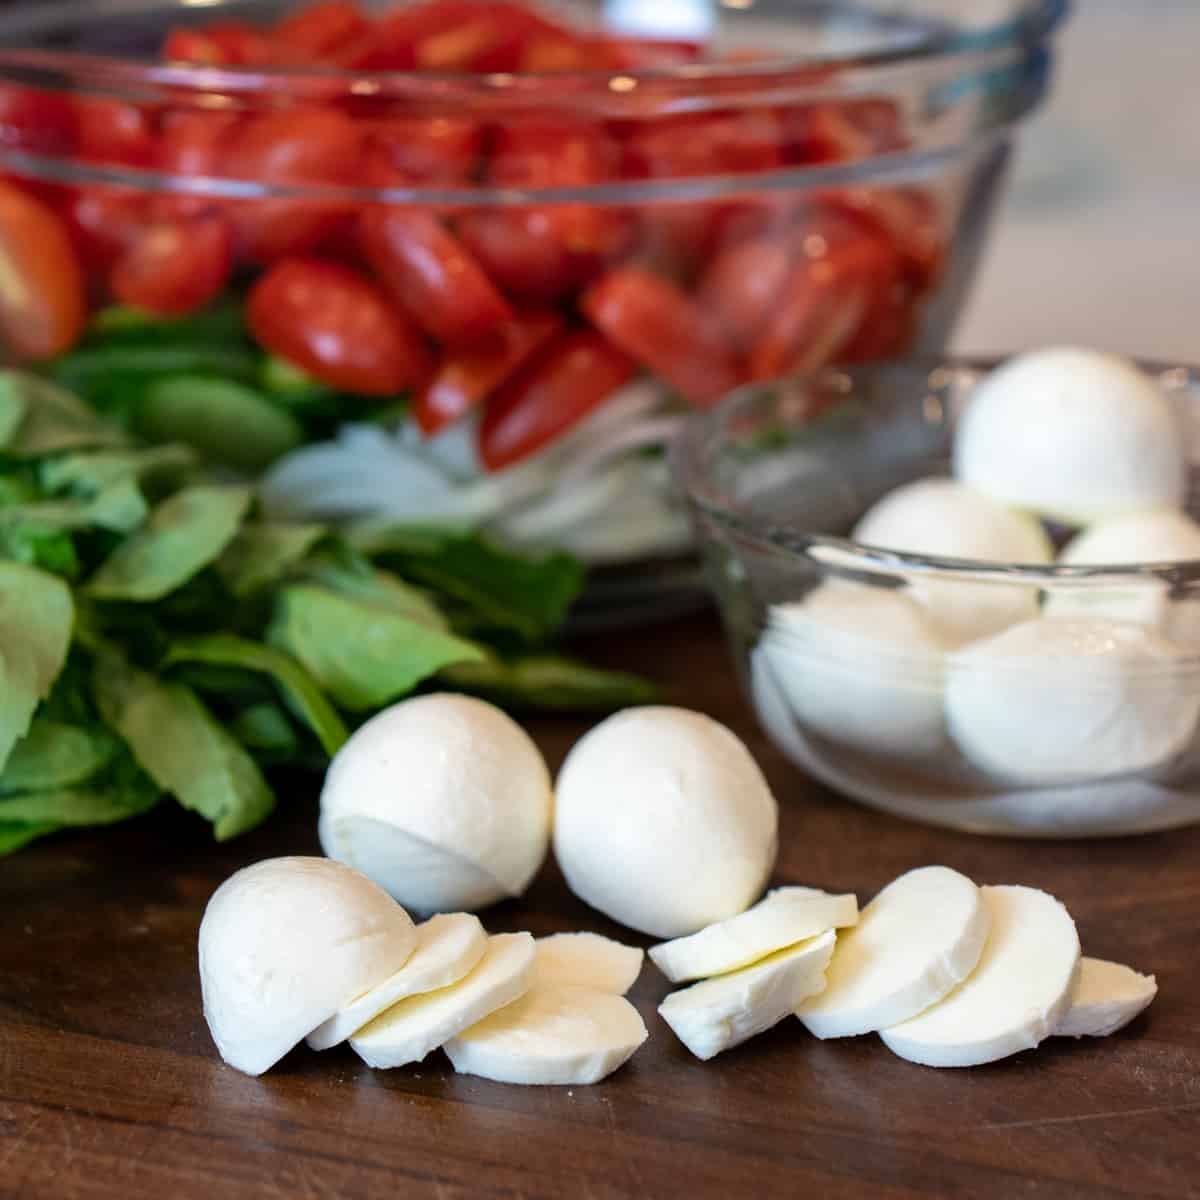 Fresh bocconcini cheese sliced into thin medallions.